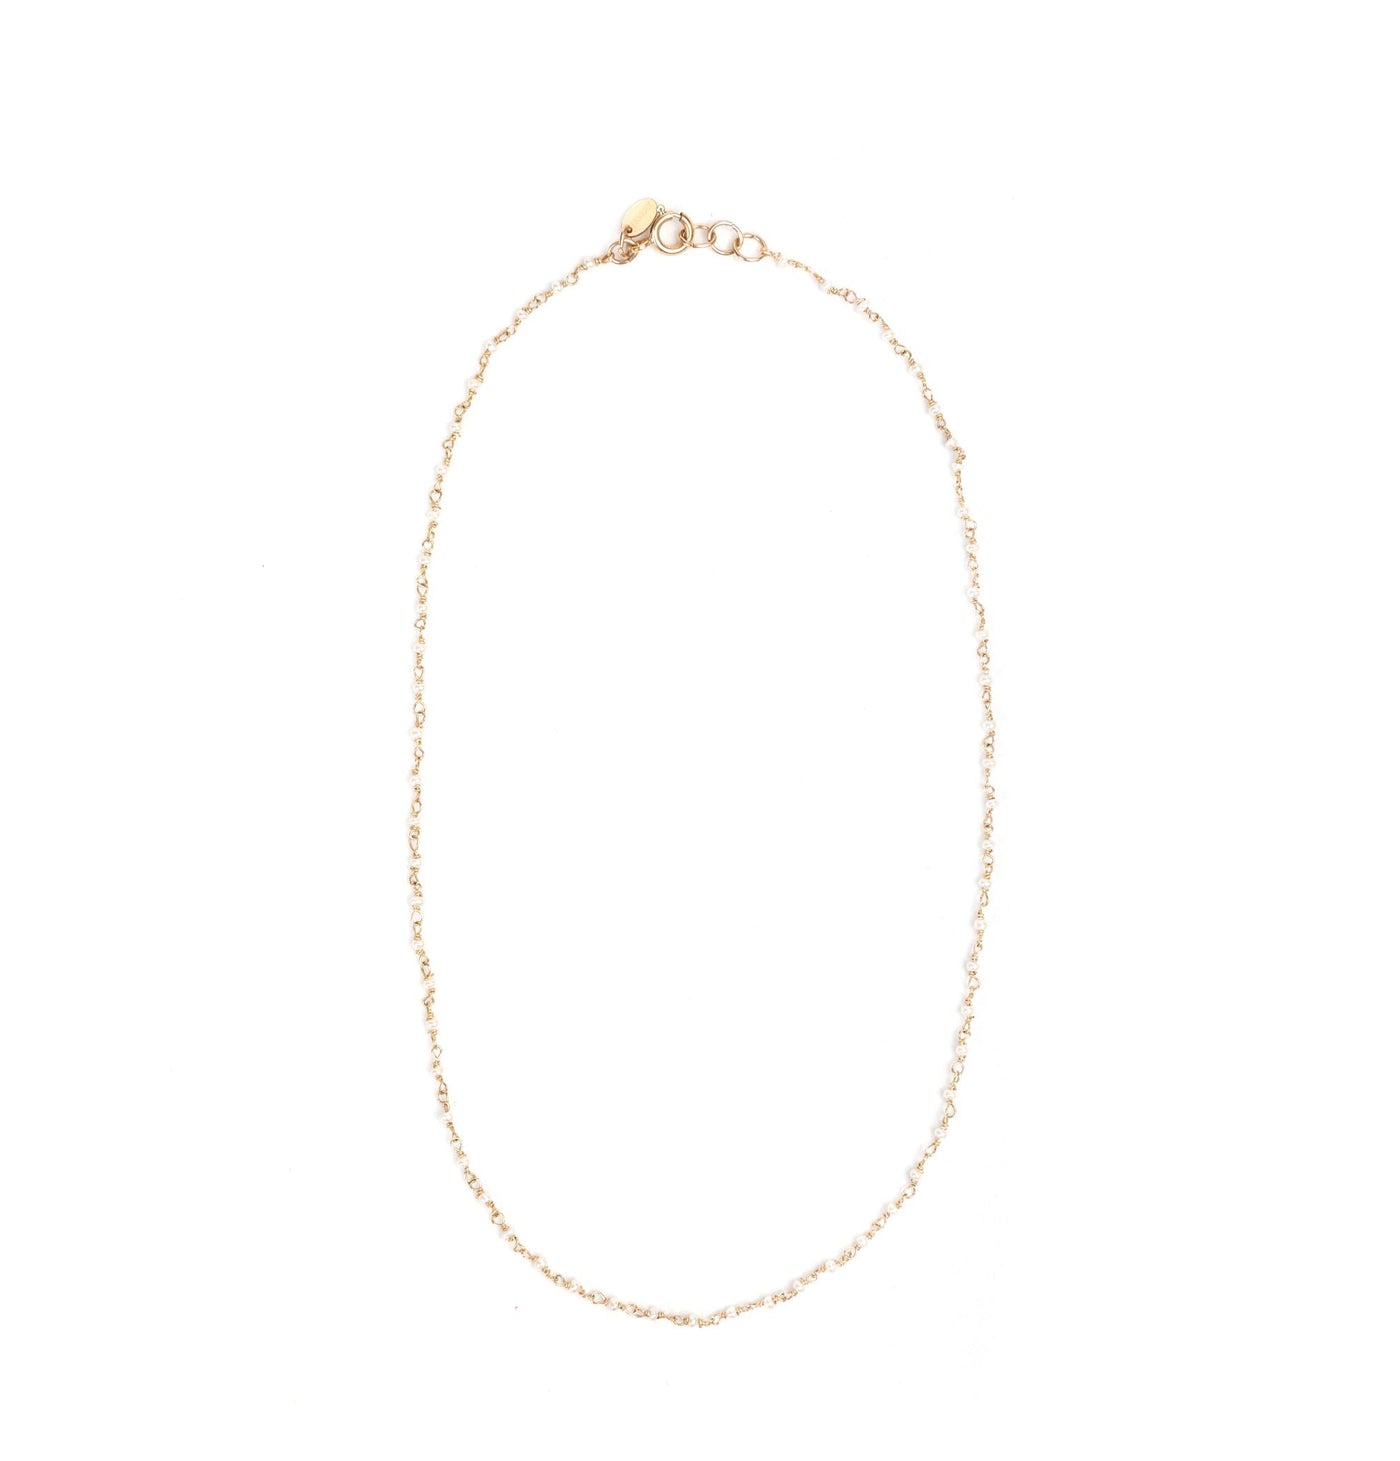 Pearl Necklace #1 (1.5-2mm) - Pearl & Yellow Gold - By Boho Hunter